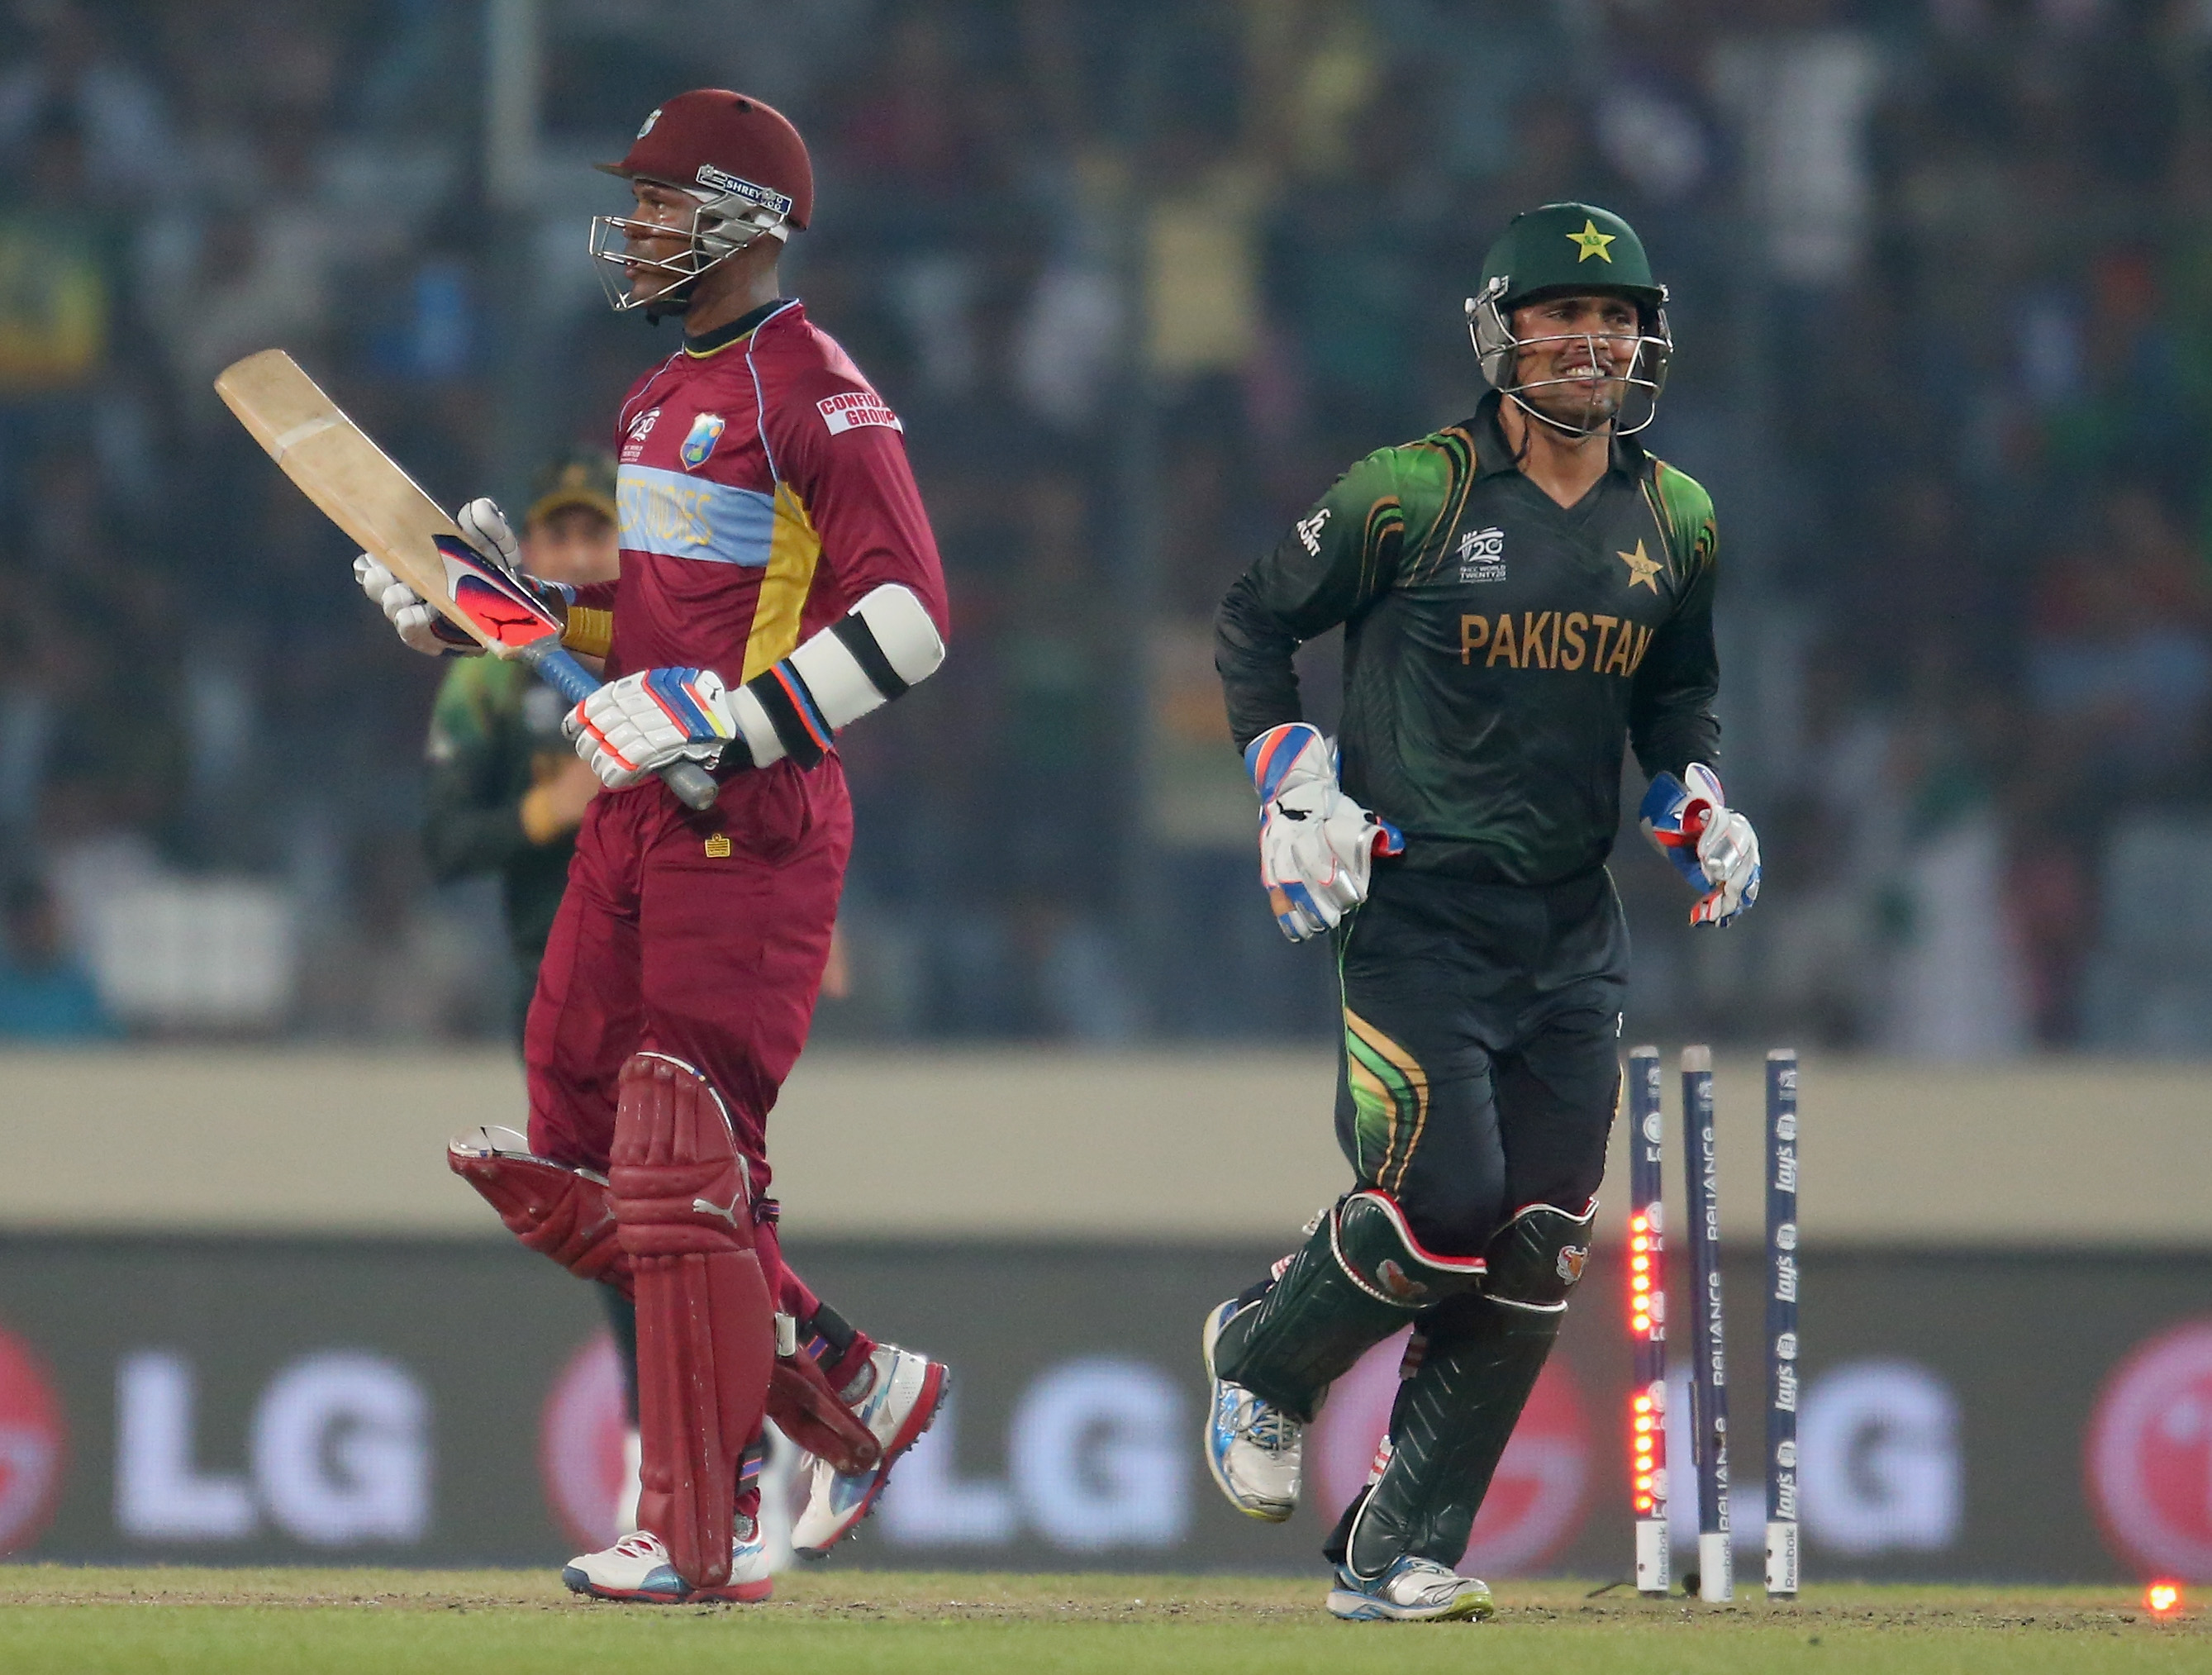 Pakistan should have an advantage in World T20 because of experience in the UAE, points Kamran Akmal